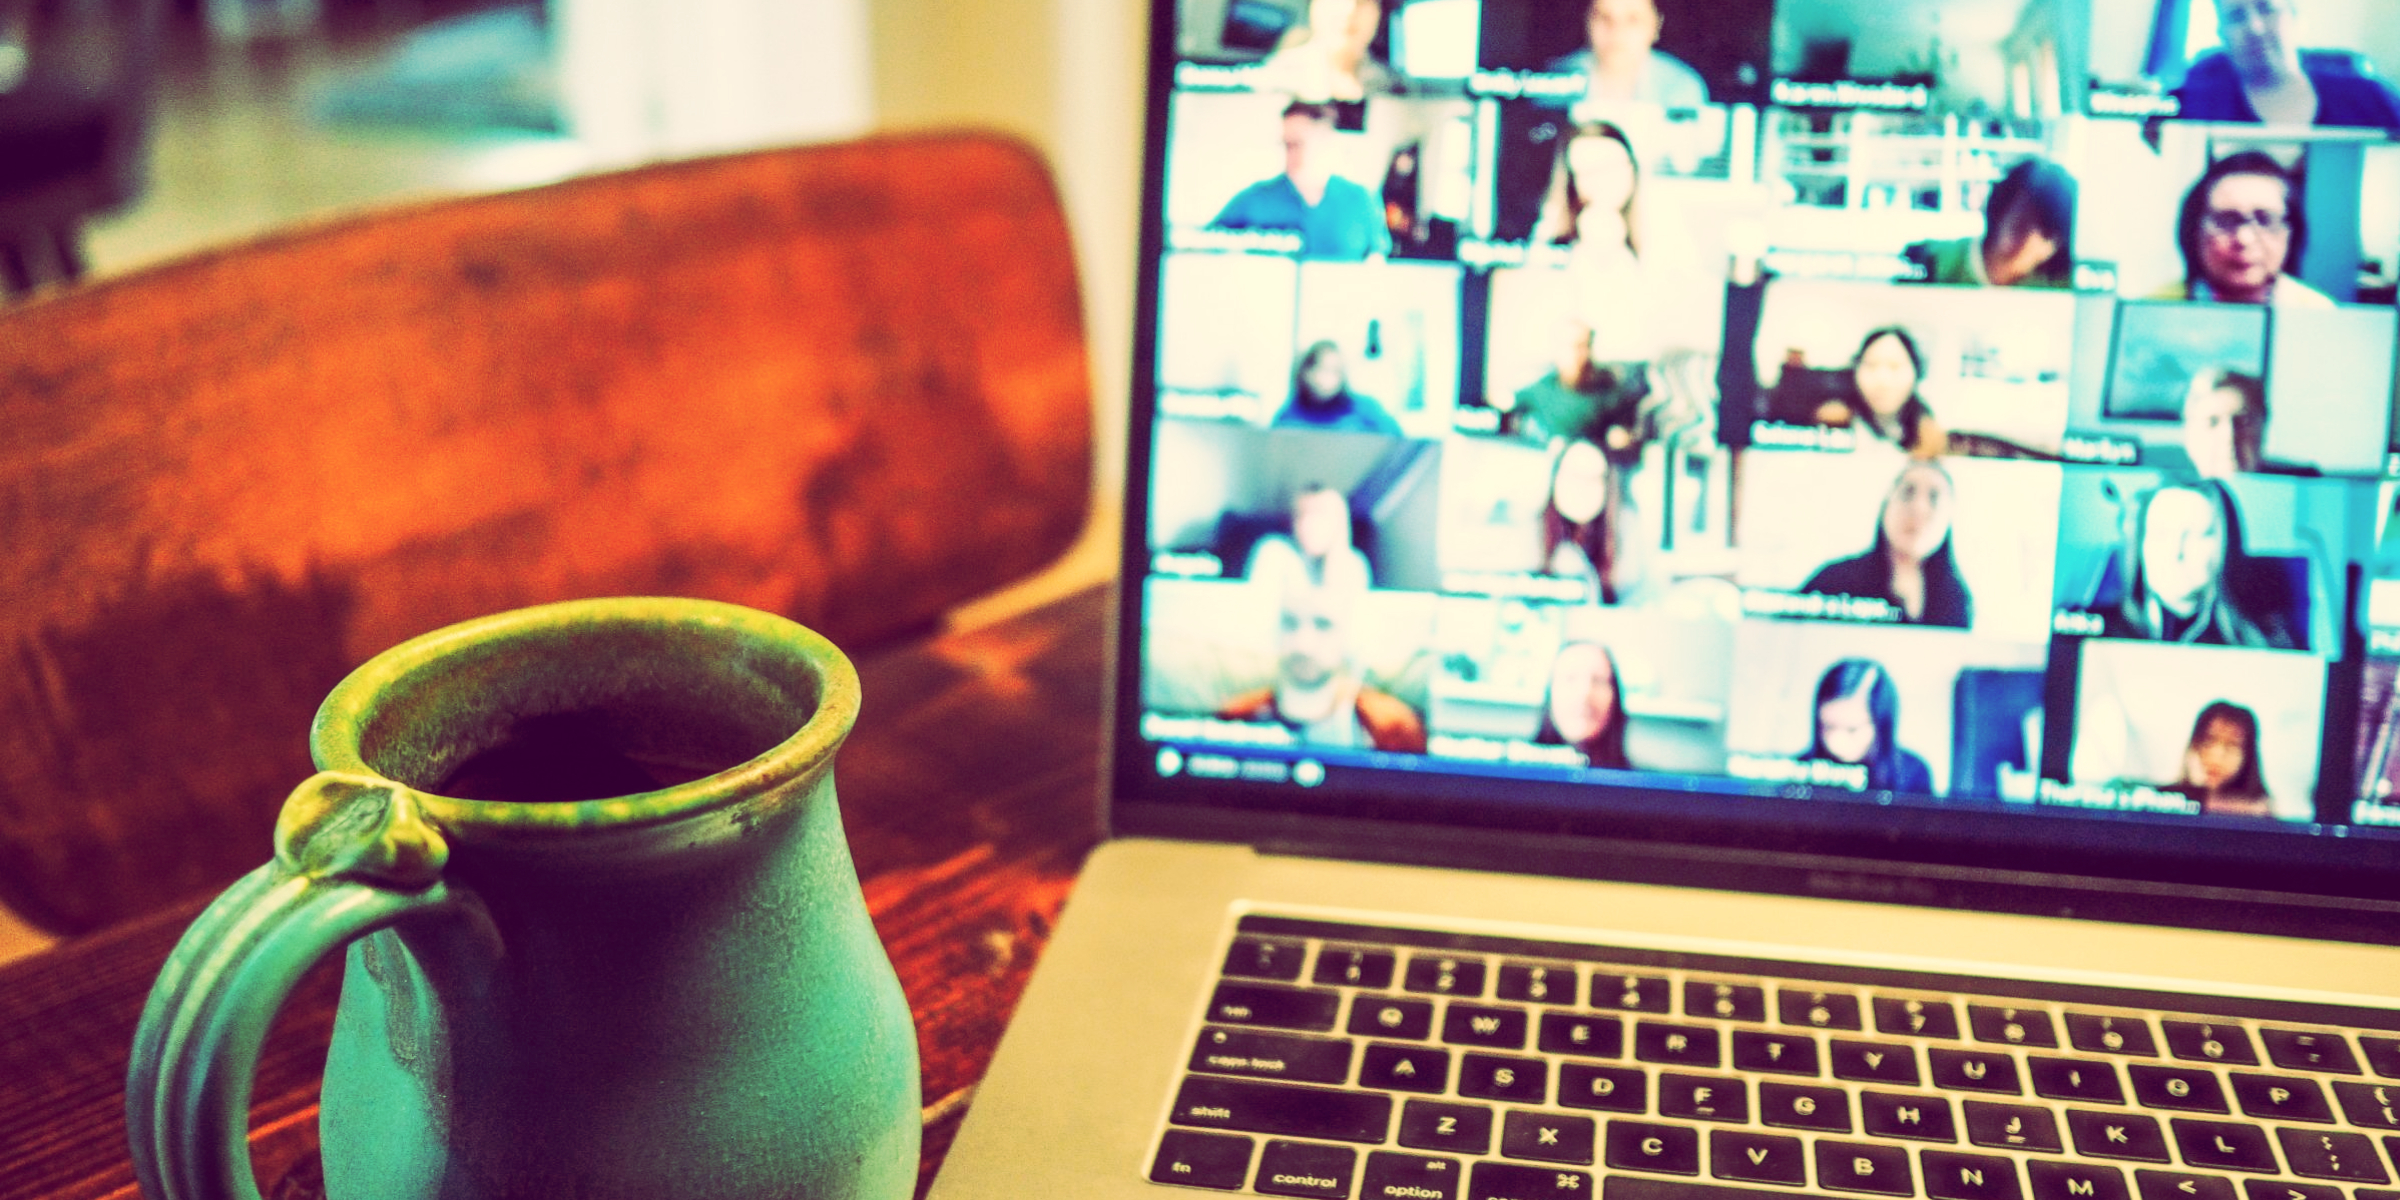 A laptop and a mug of coffee, on the screen of the laptop are several people on a zoom call.